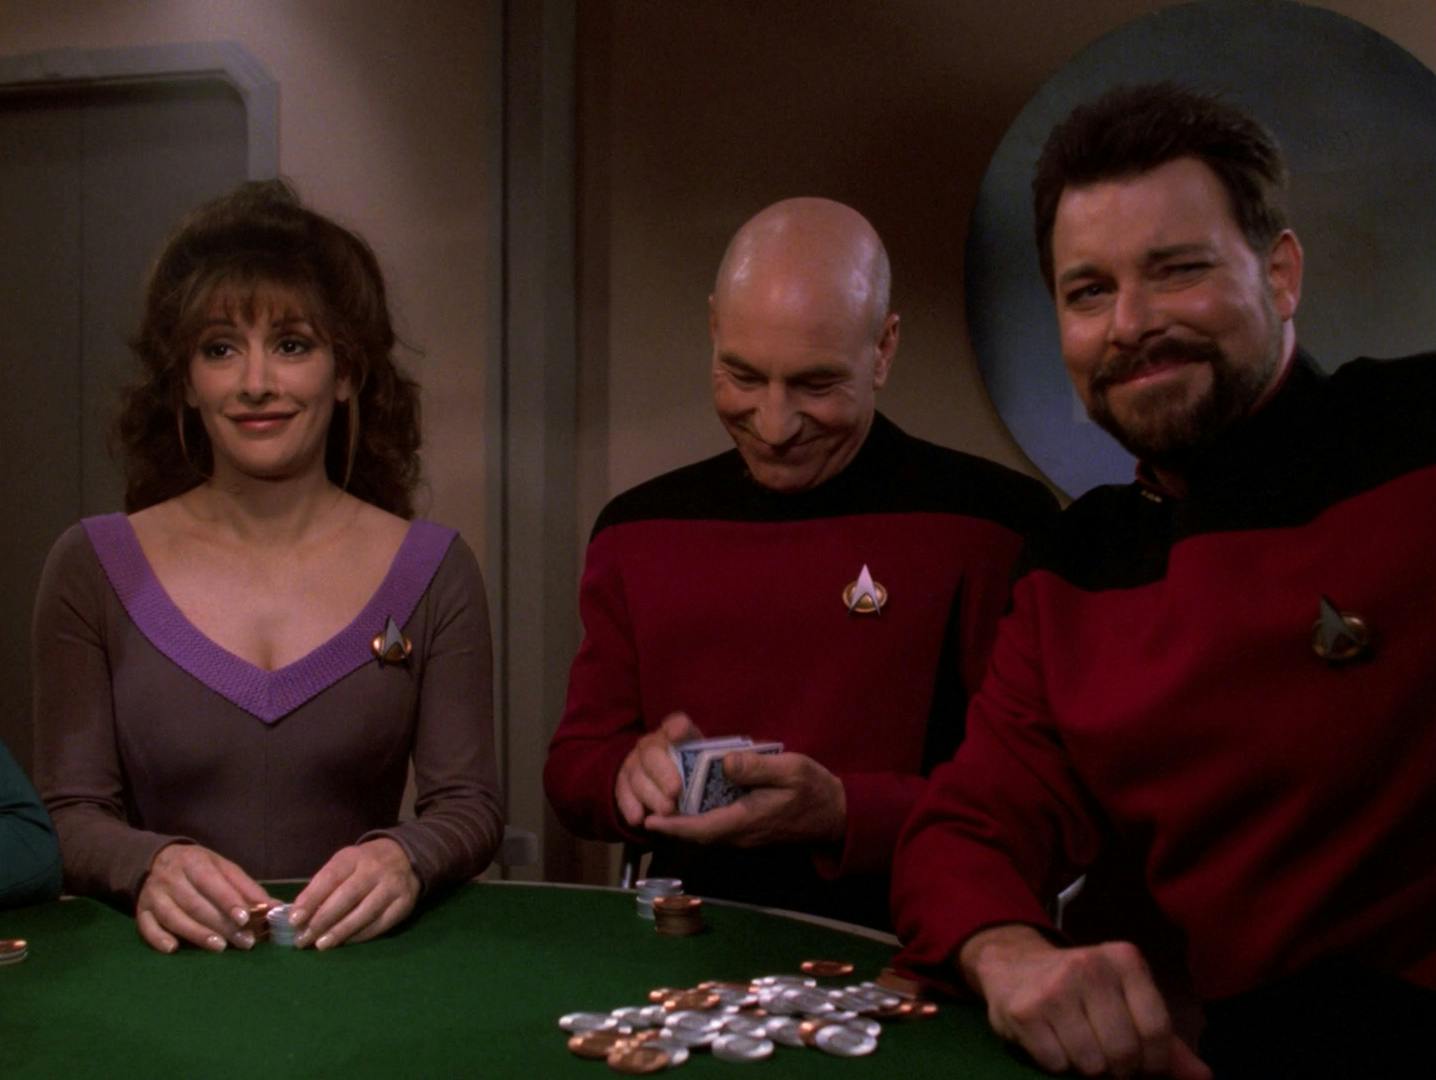 Picard joins his first crew poker game, shuffling the deck as he smiles to himself, as Deanna Troi and Riker look at the others at the table in 'All Good Things...'